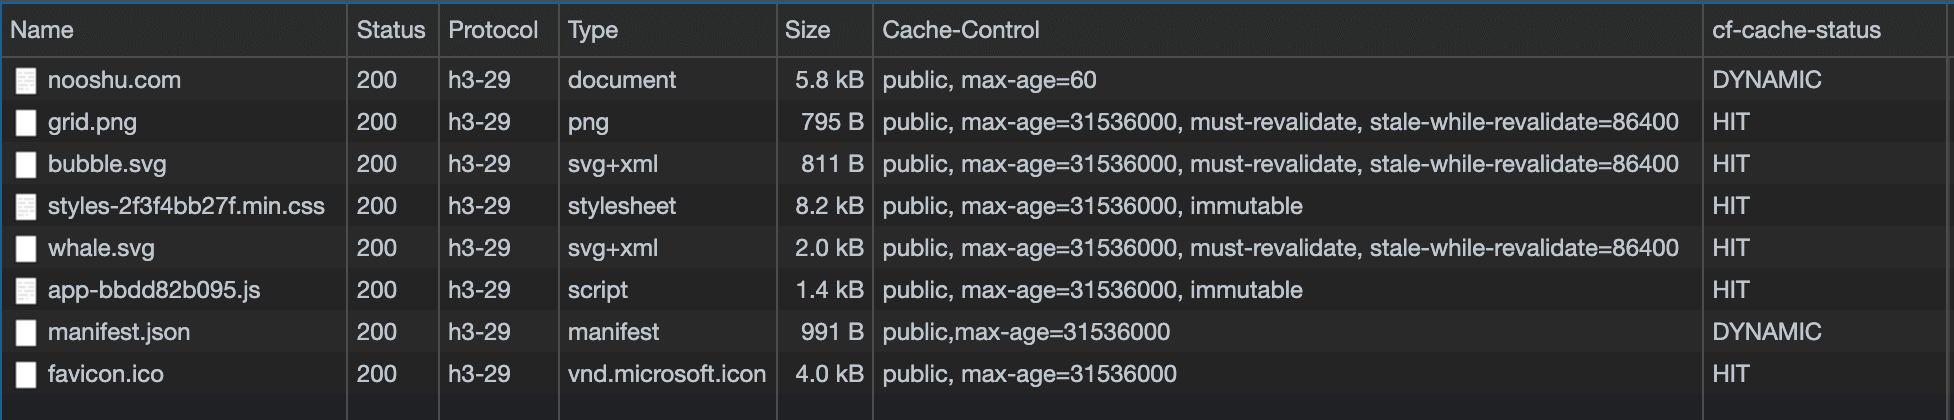 Status of cache headers once run through Cloudflare to examine the caching status.